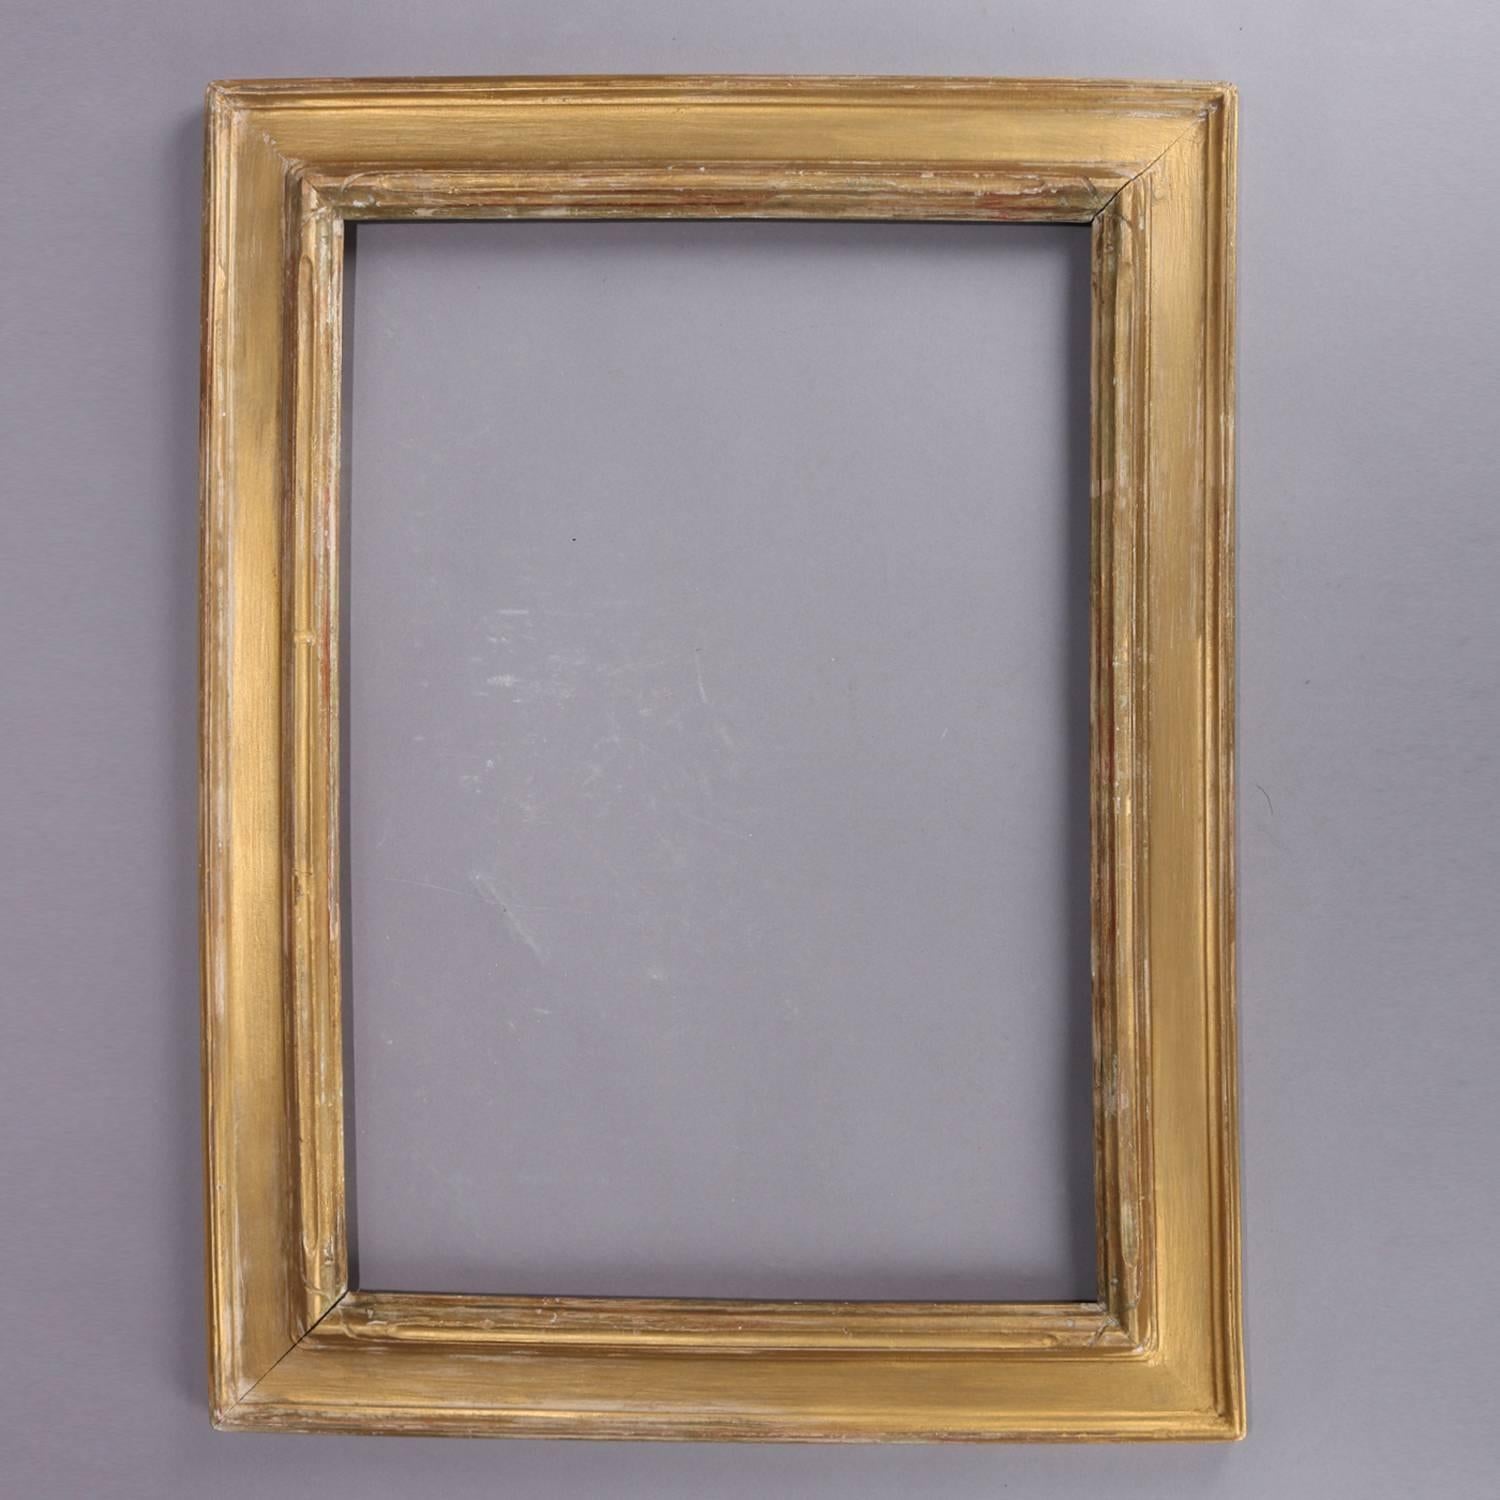 Pair of matching antique Arts & Crafts genuine Newcomb-Macklin art picture frames feature giltwood construction with traditional simple form and lines and carved decoration, original label reads 